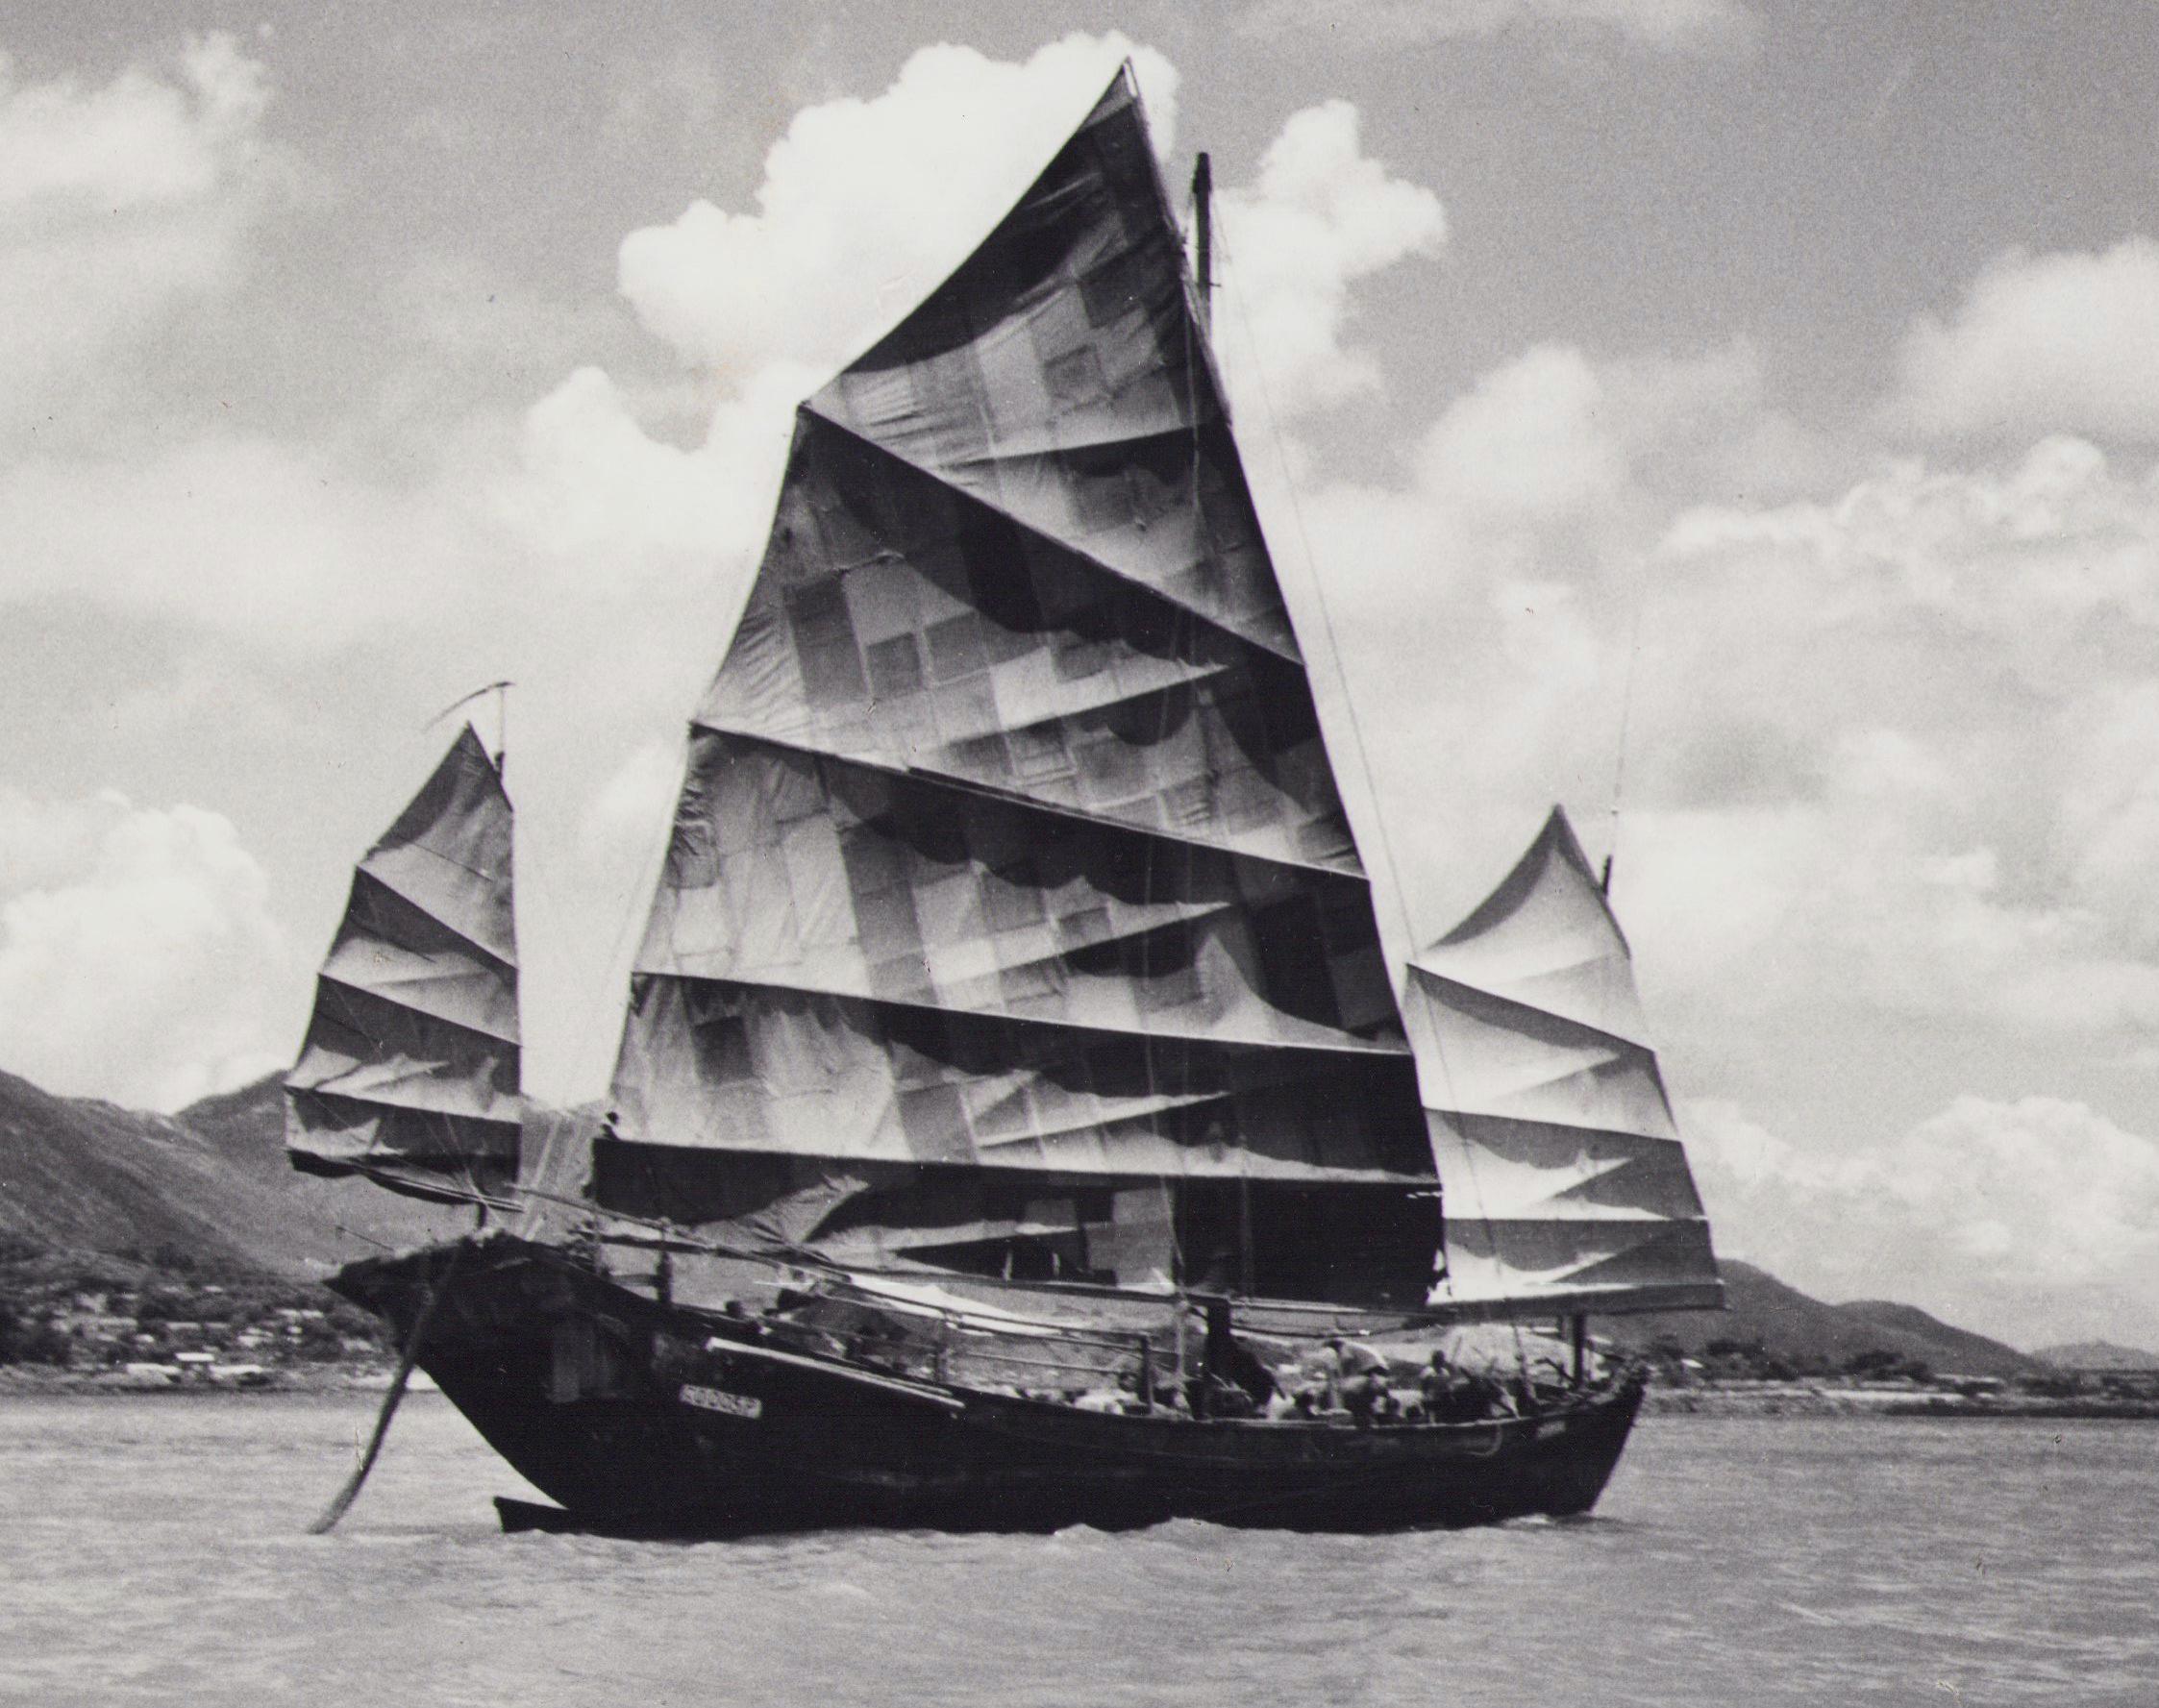 Hong Kong, Boat, Water, Black and White Photography, 1960s, 23, 9 x 30, 1 cm - Gray Portrait Photograph by Hanna Seidel